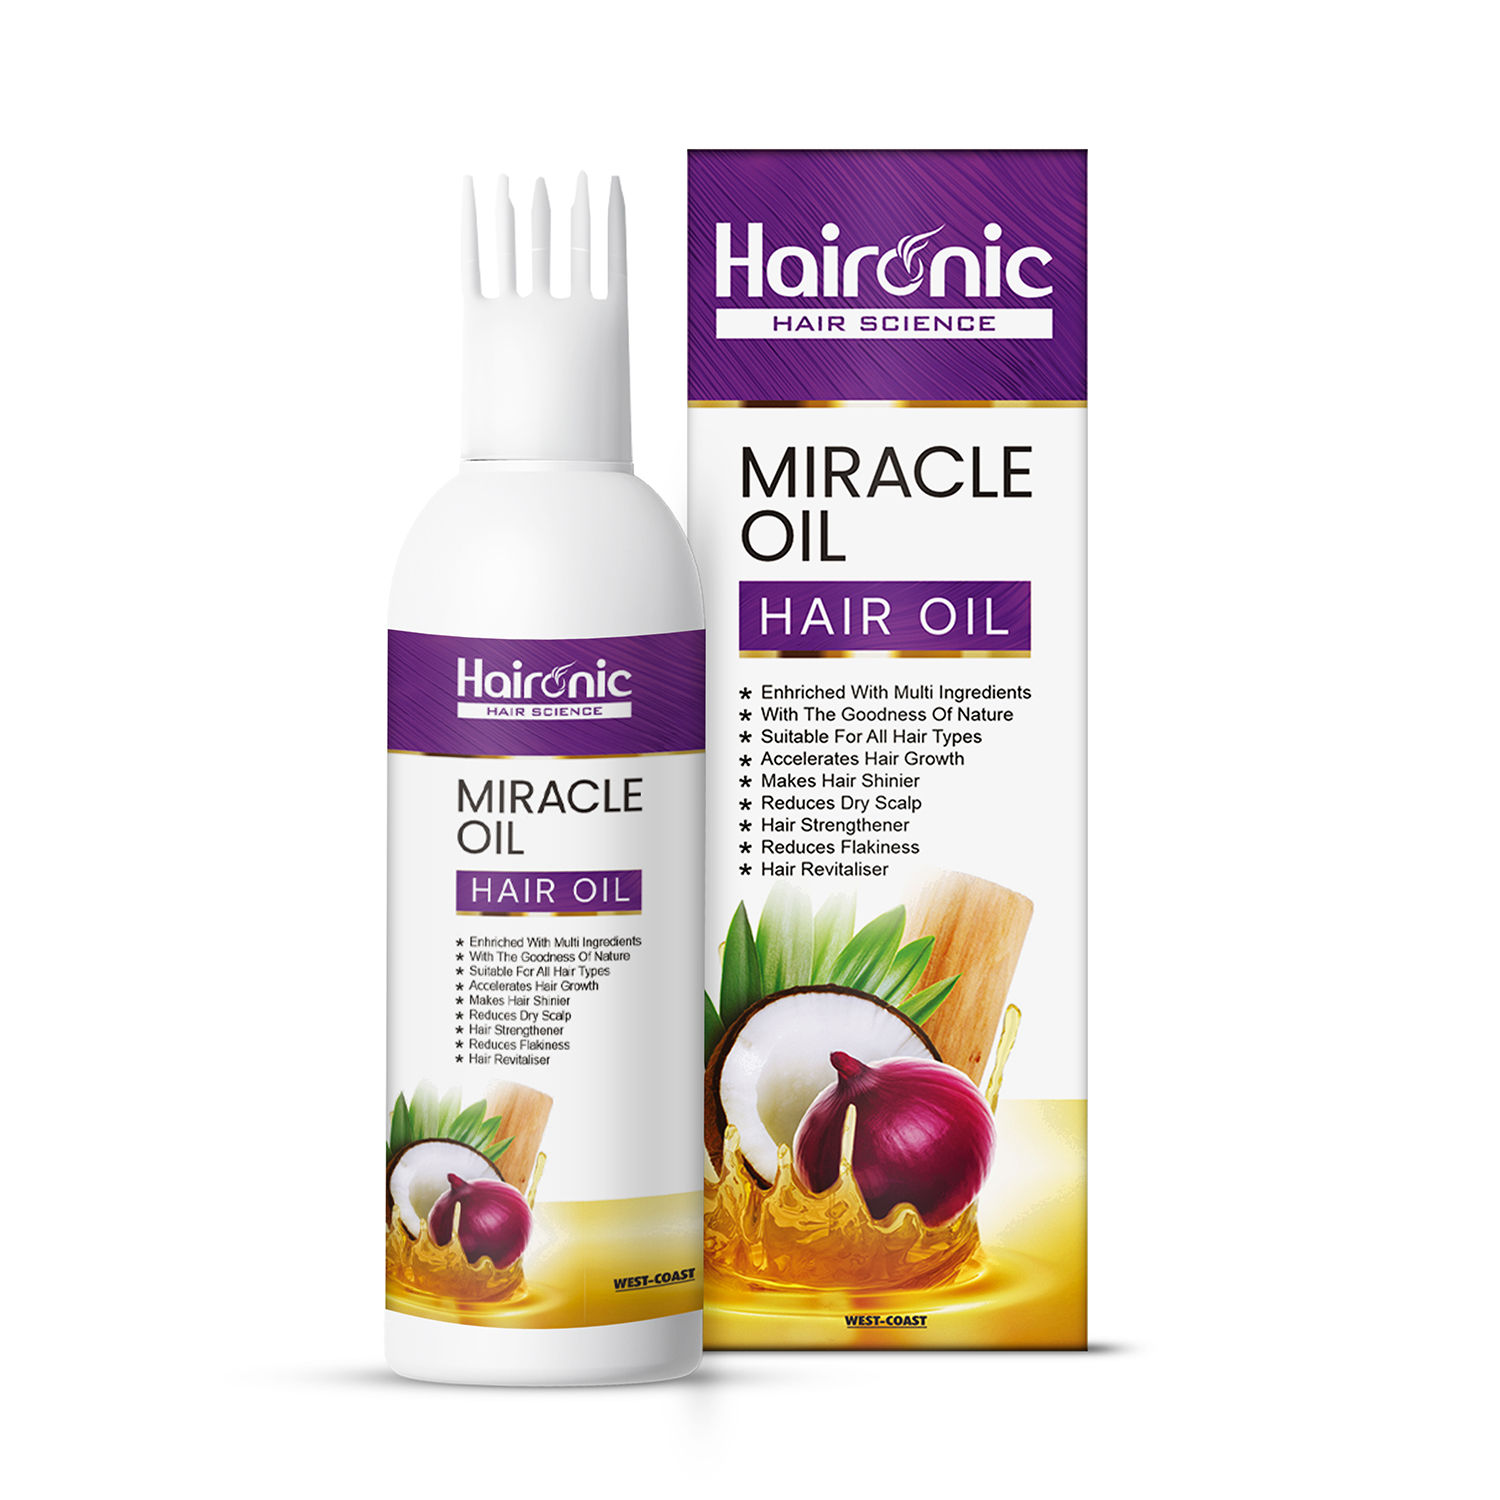 Buy Haironic Hair Science Miracle Hair Oil Enriched With Multi Ingredients for Anti-Hair Fall Control, Promote Hair Growth with Organic Onion and Sesame Seeds Oil -100ml - Purplle